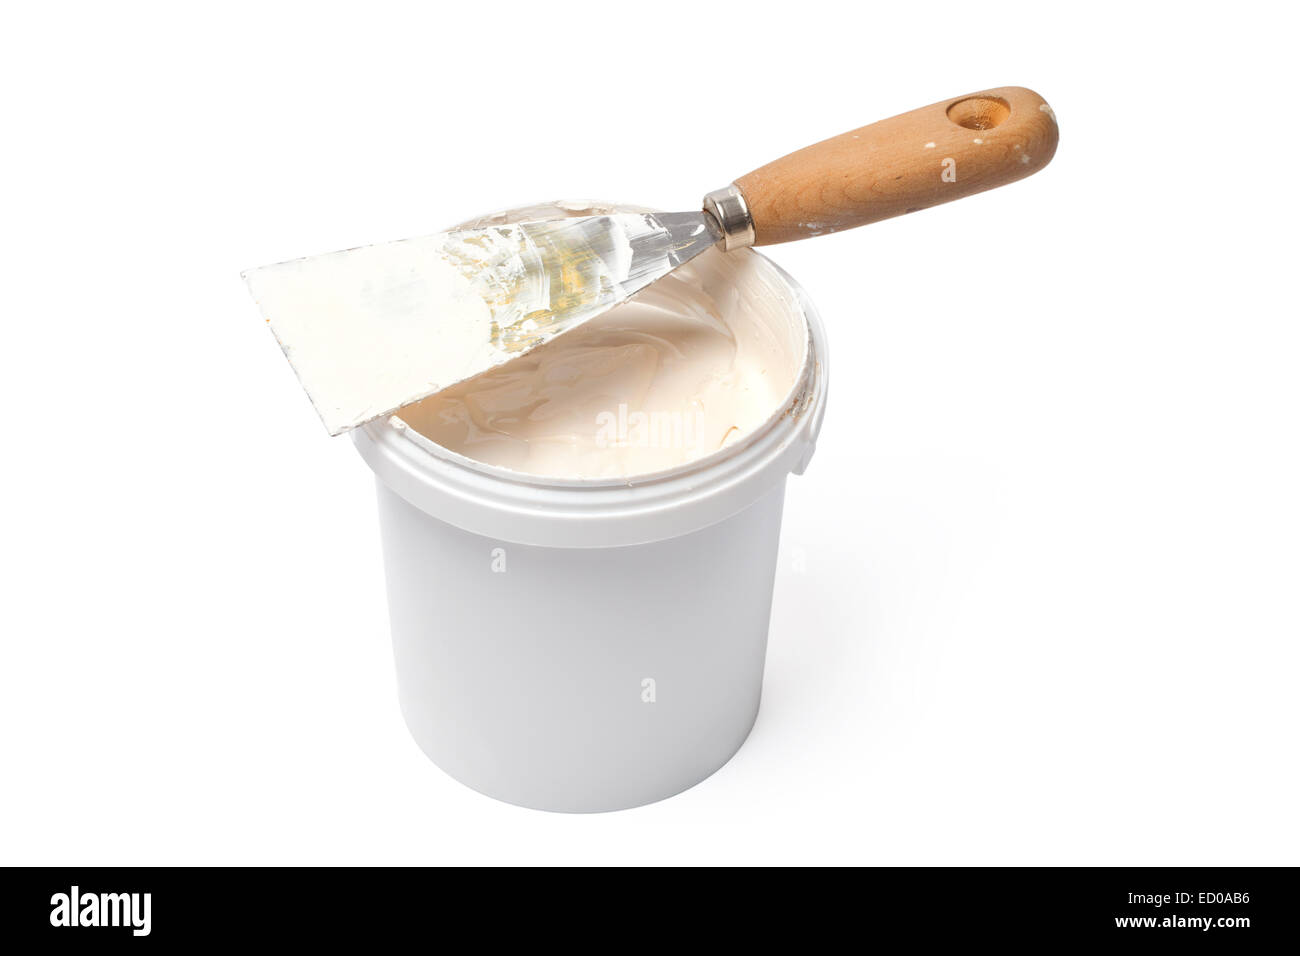 Spatula and bucket with plastering material isolated on white background Stock Photo